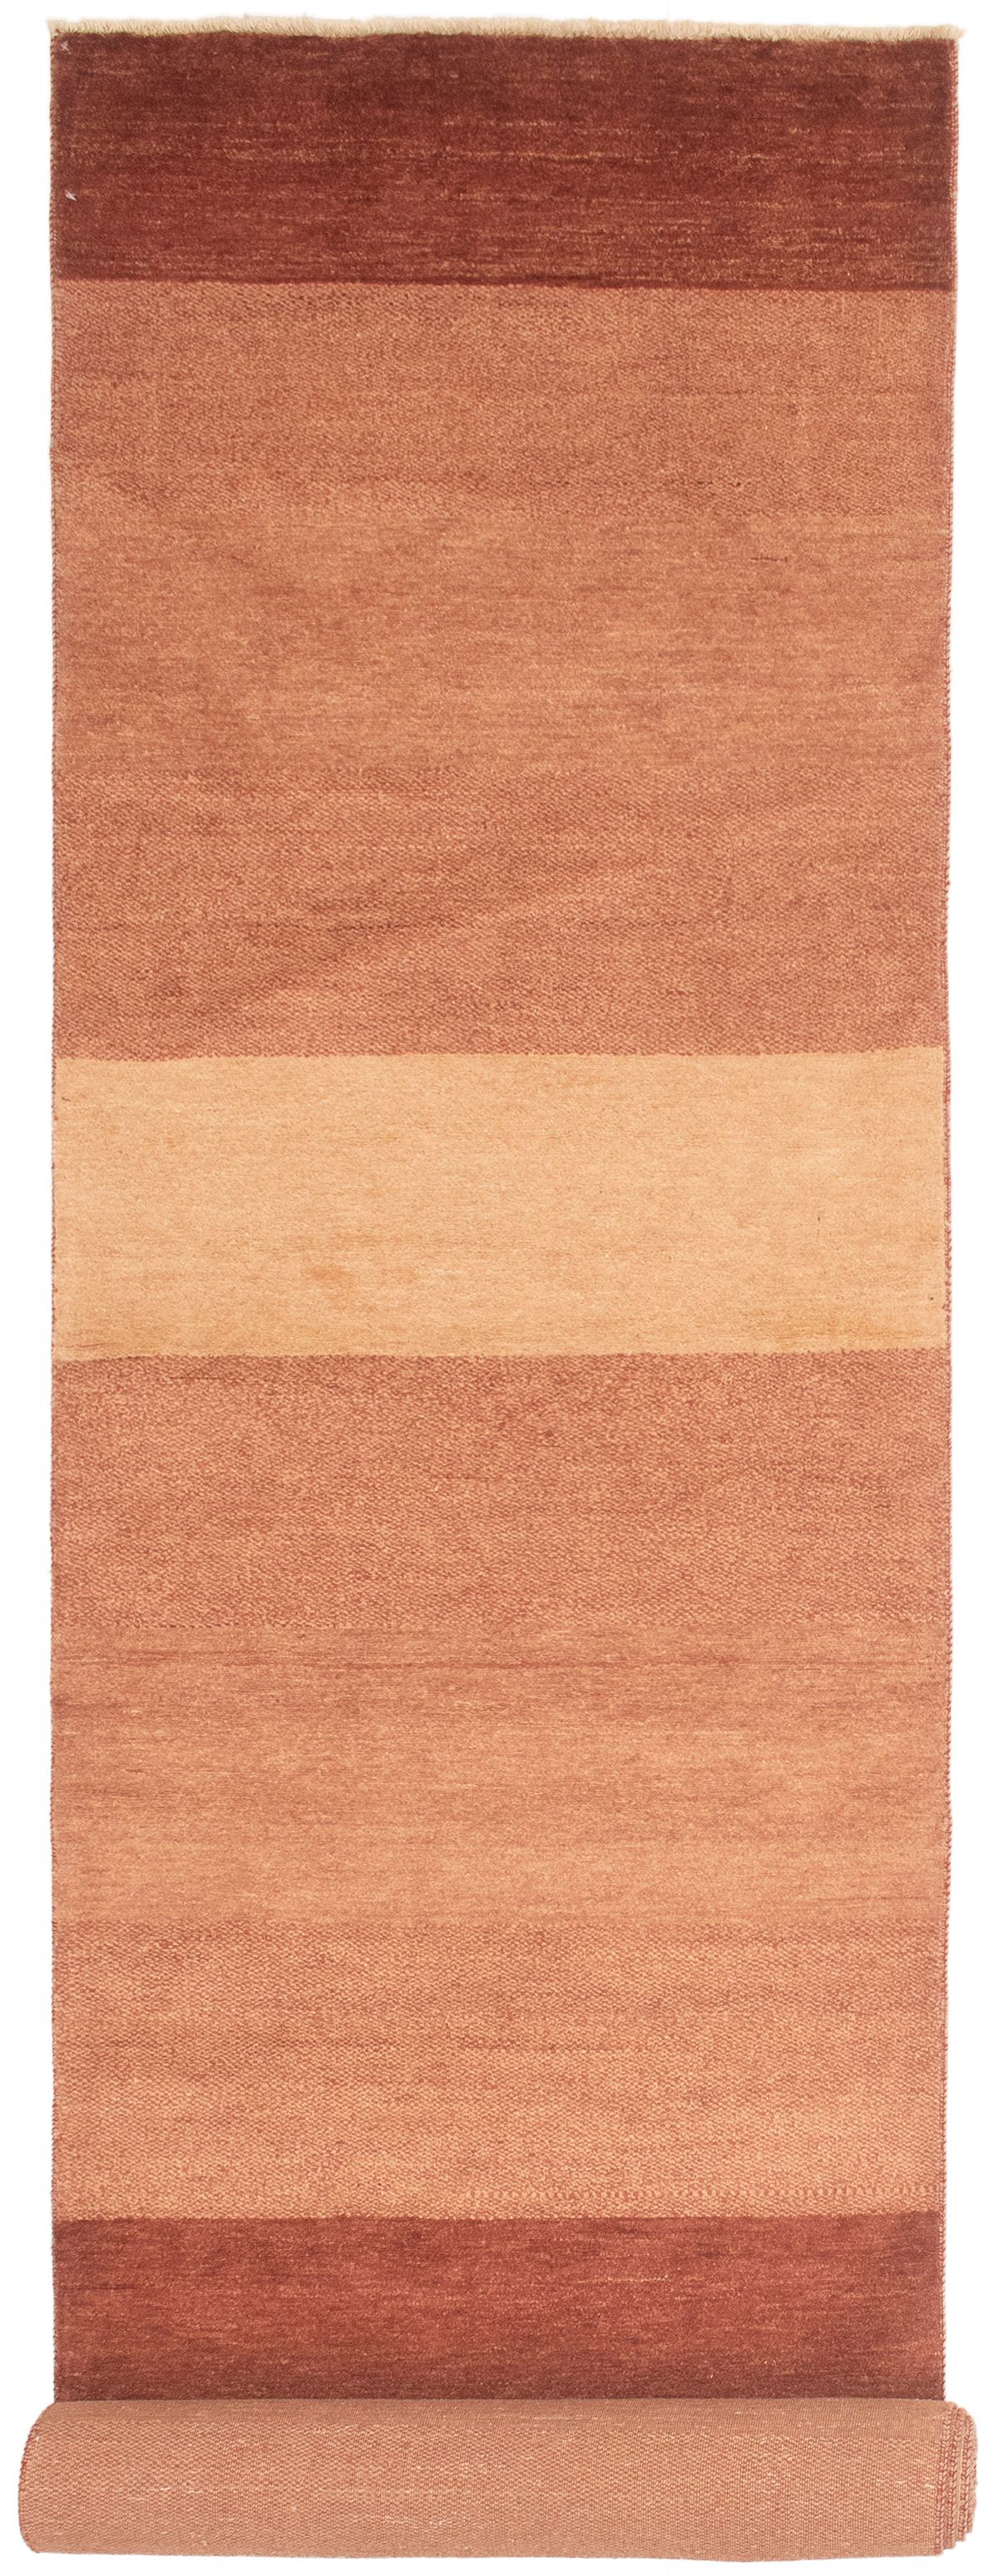 Hand-knotted Finest Ziegler Chobi Brown Wool Rug 3'2" x 16'10" Size: 3'2" x 16'10"  